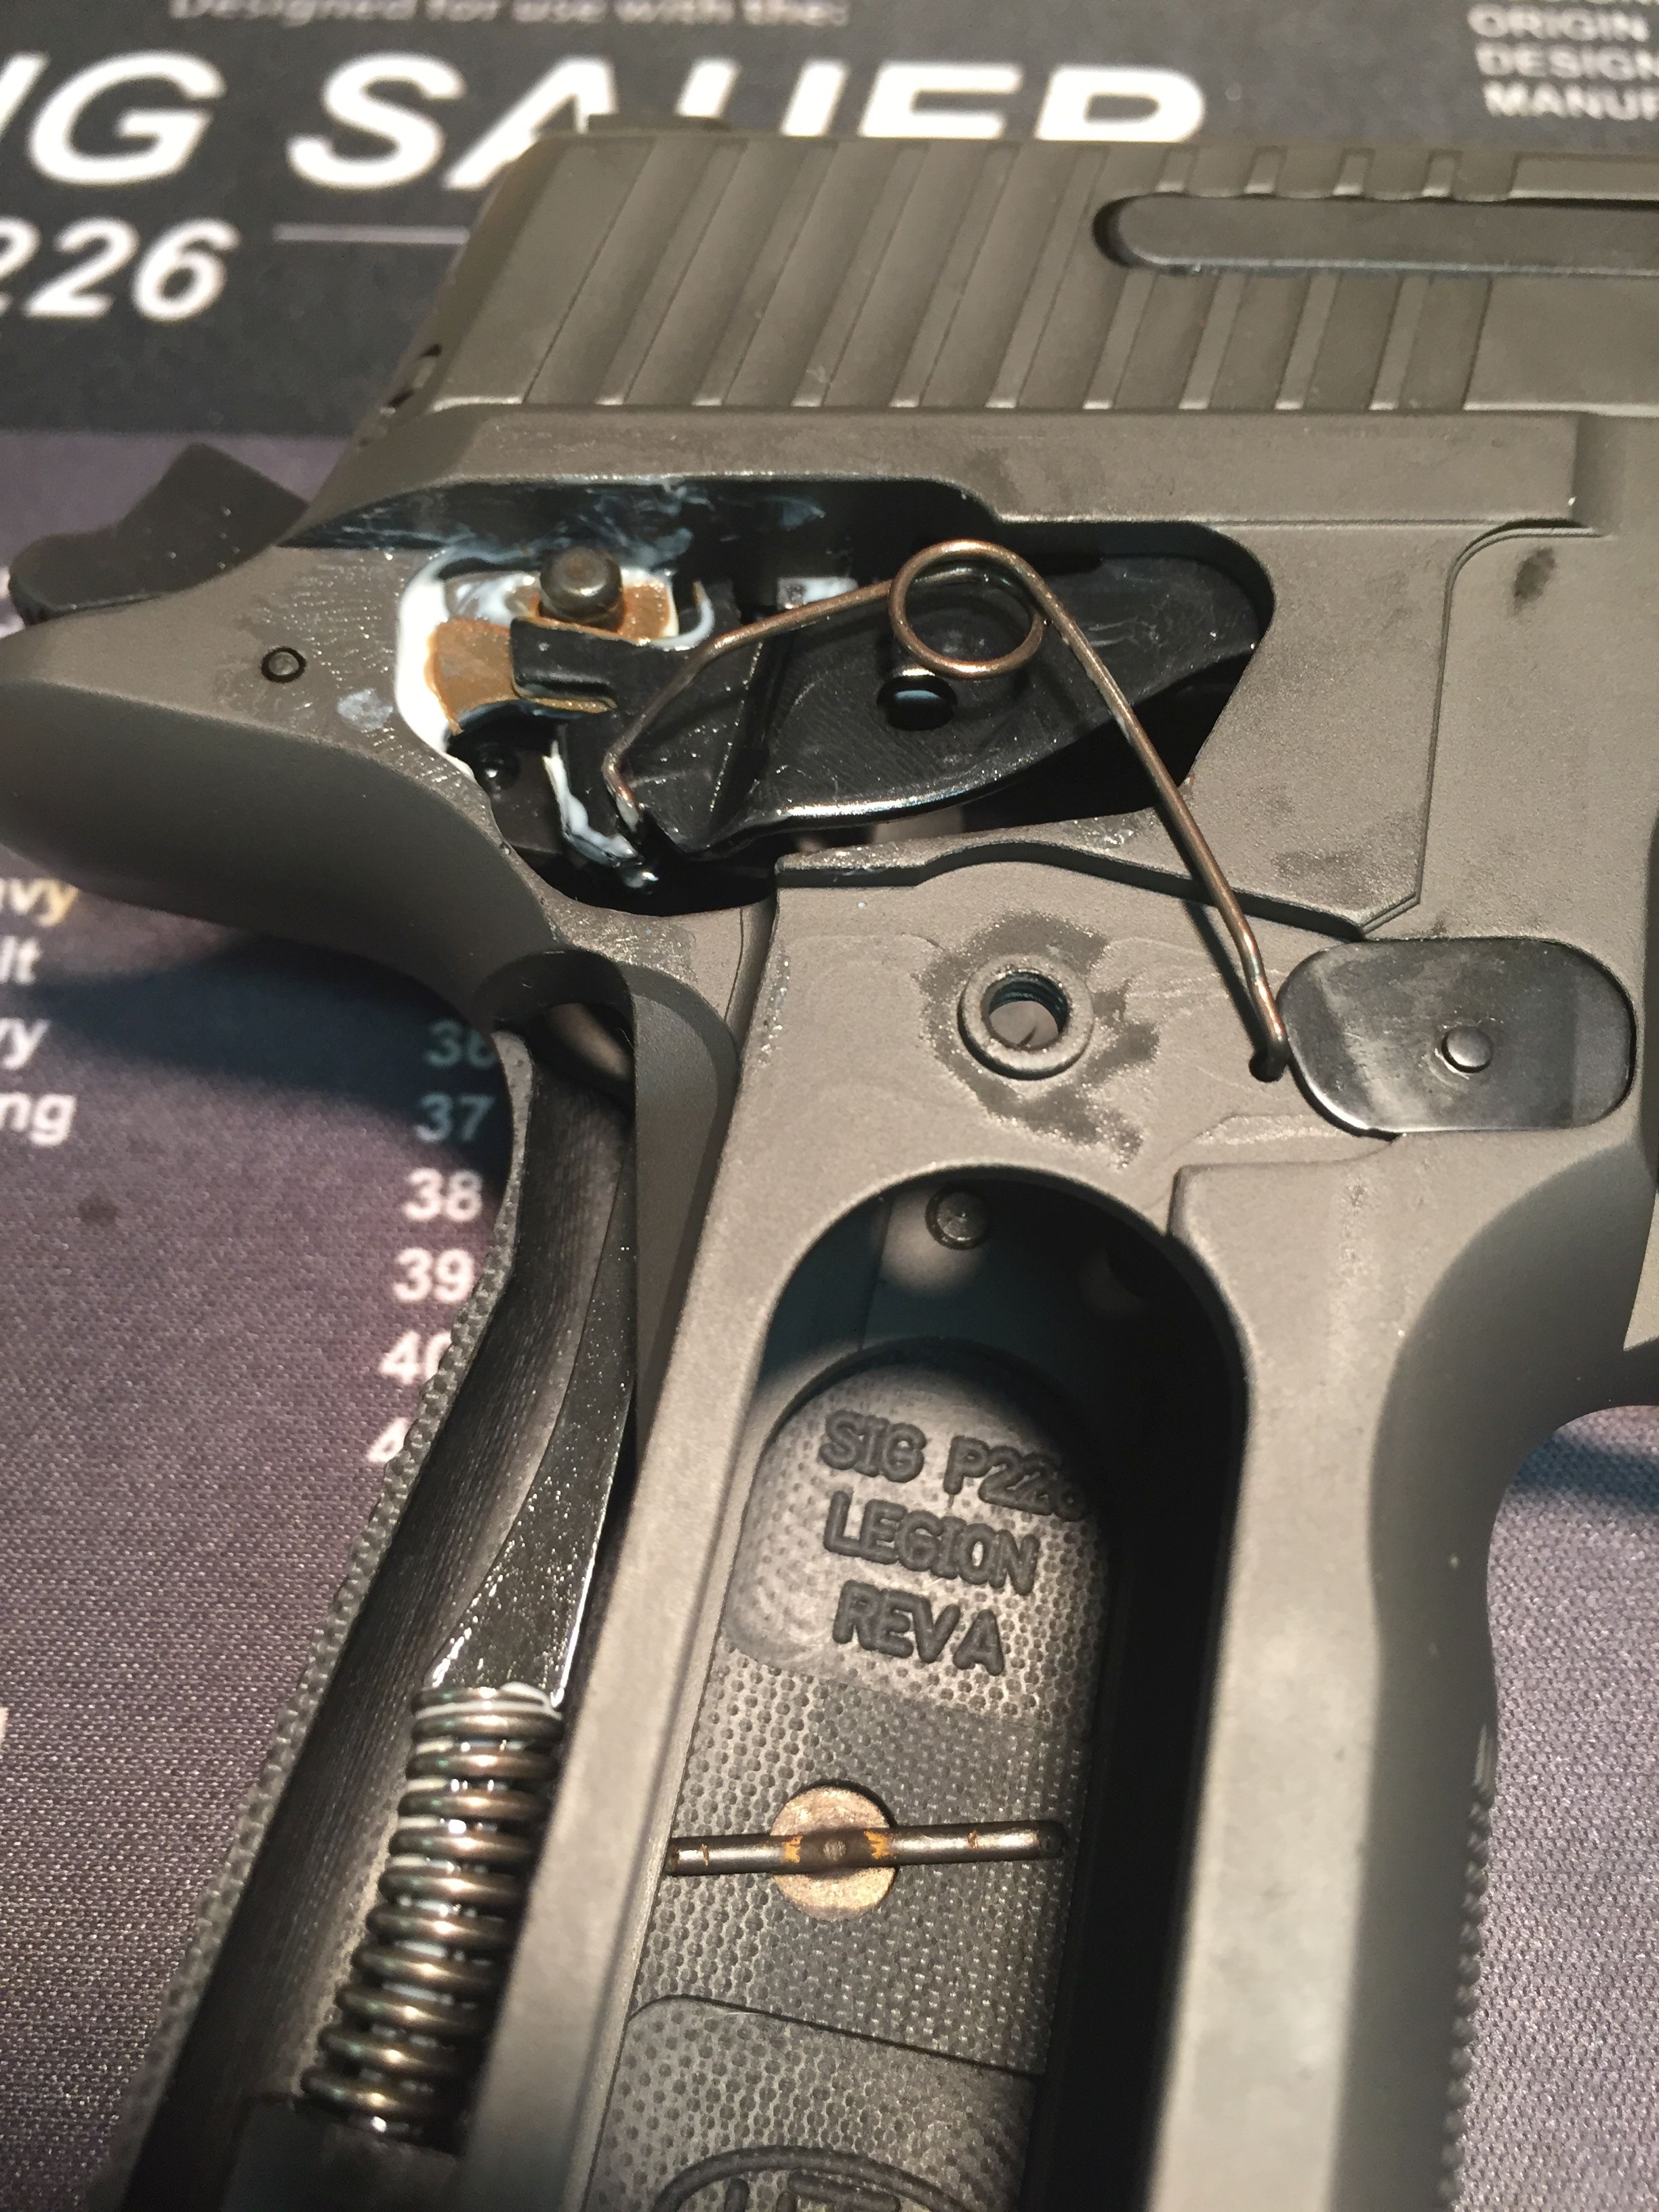 Looped trigger bar spring in modern P226s, including the Legion